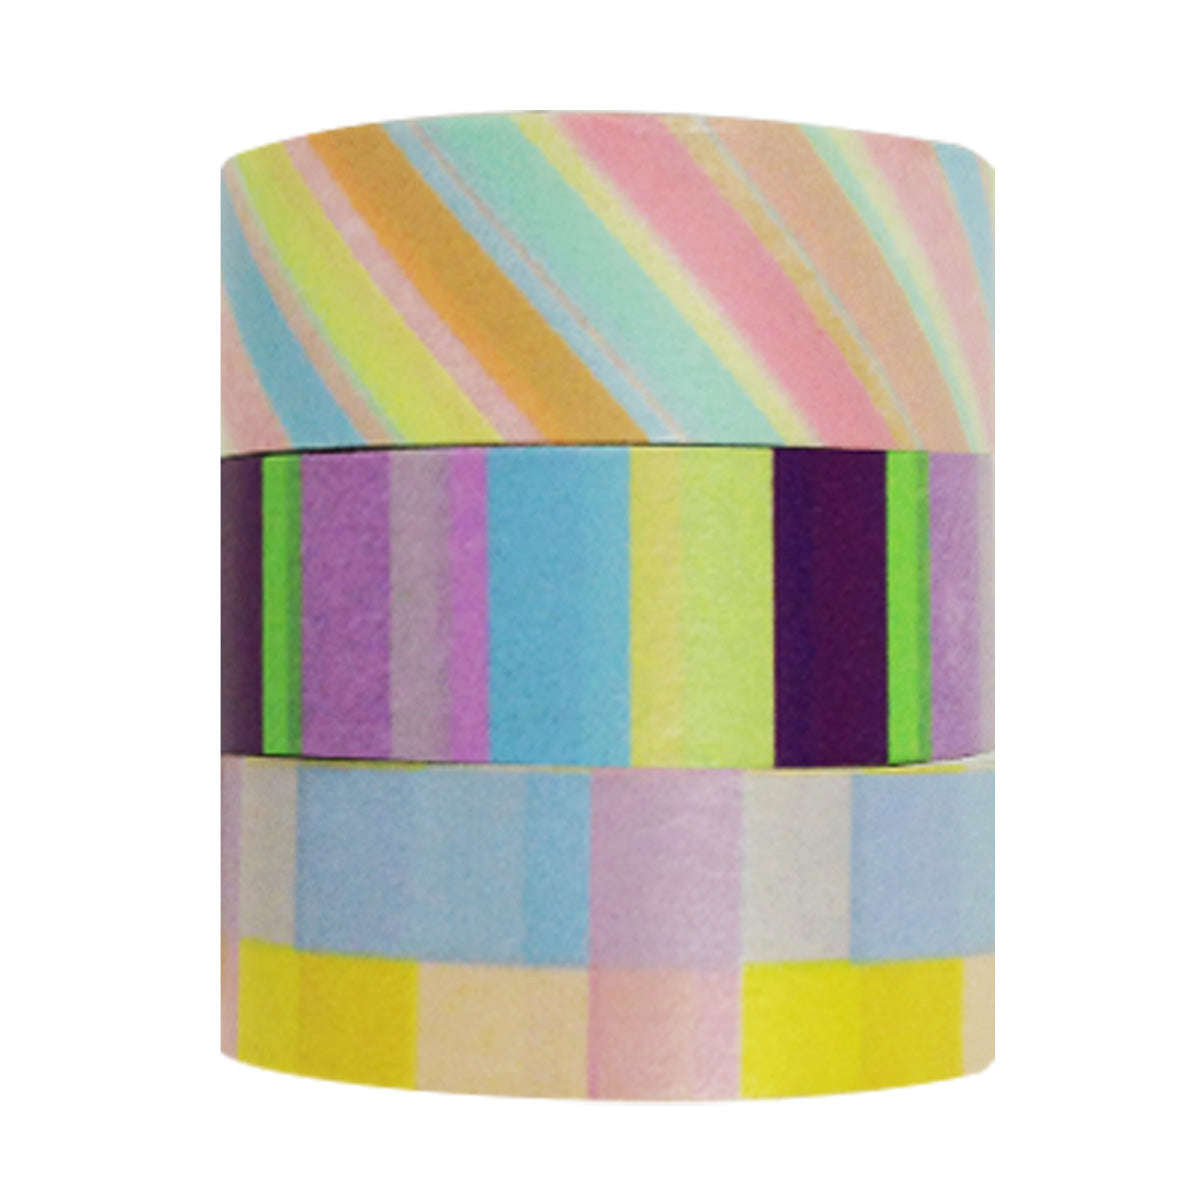 Wrapables Just For Fun Washi Masking Tape (Set of 3)